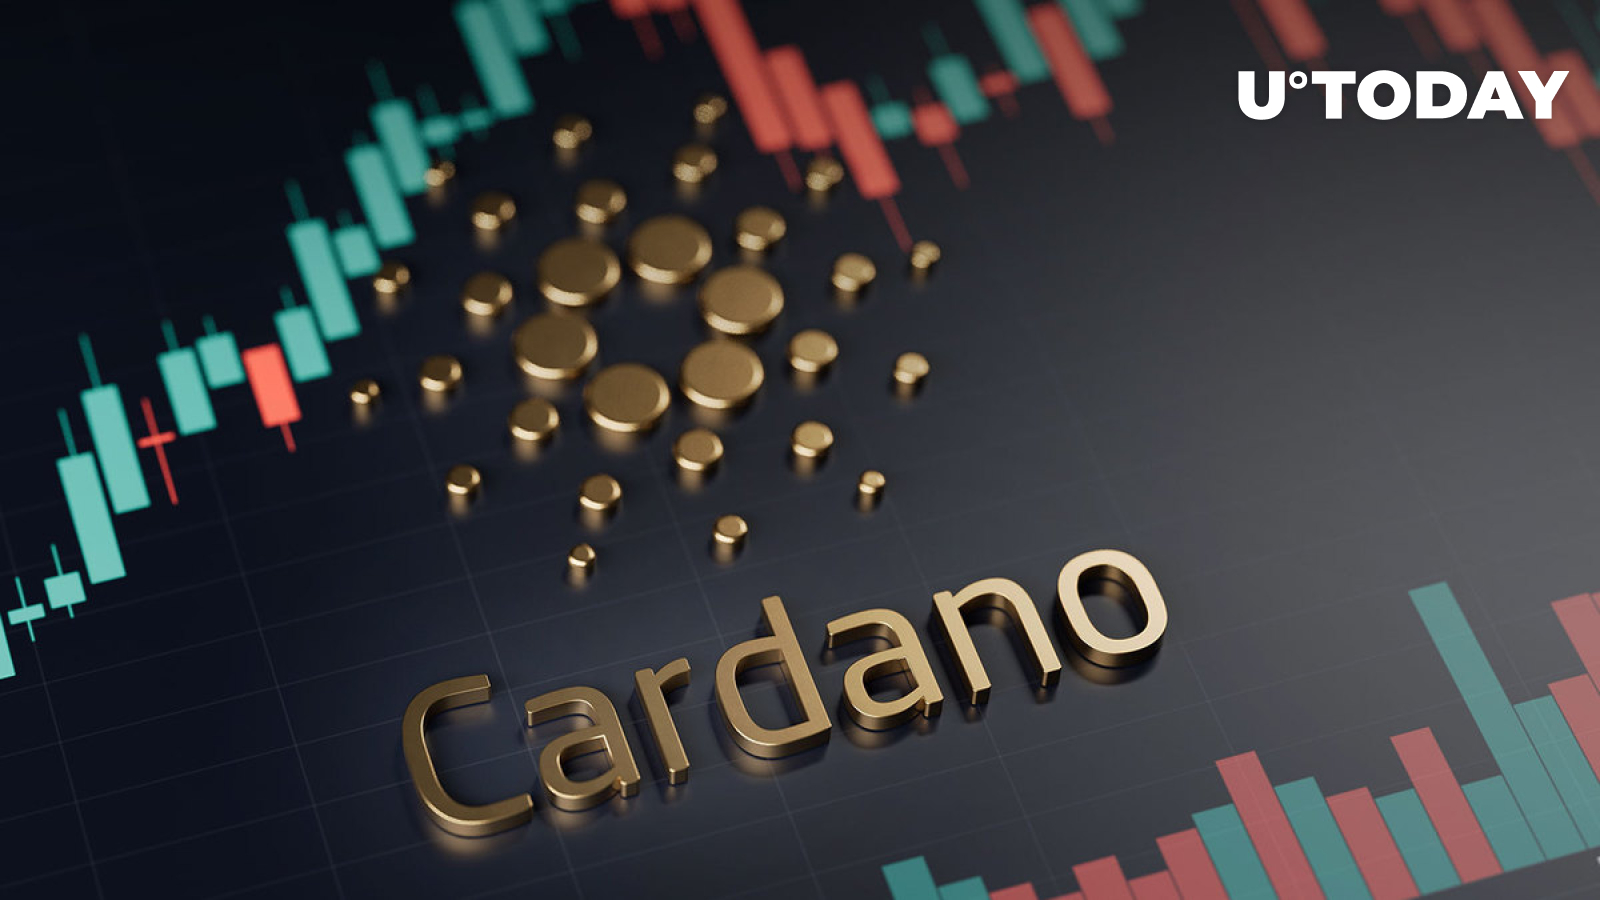 Cardano Network Experiencing Strong Growth in New Wallets, Here’s Why It May Be Happening